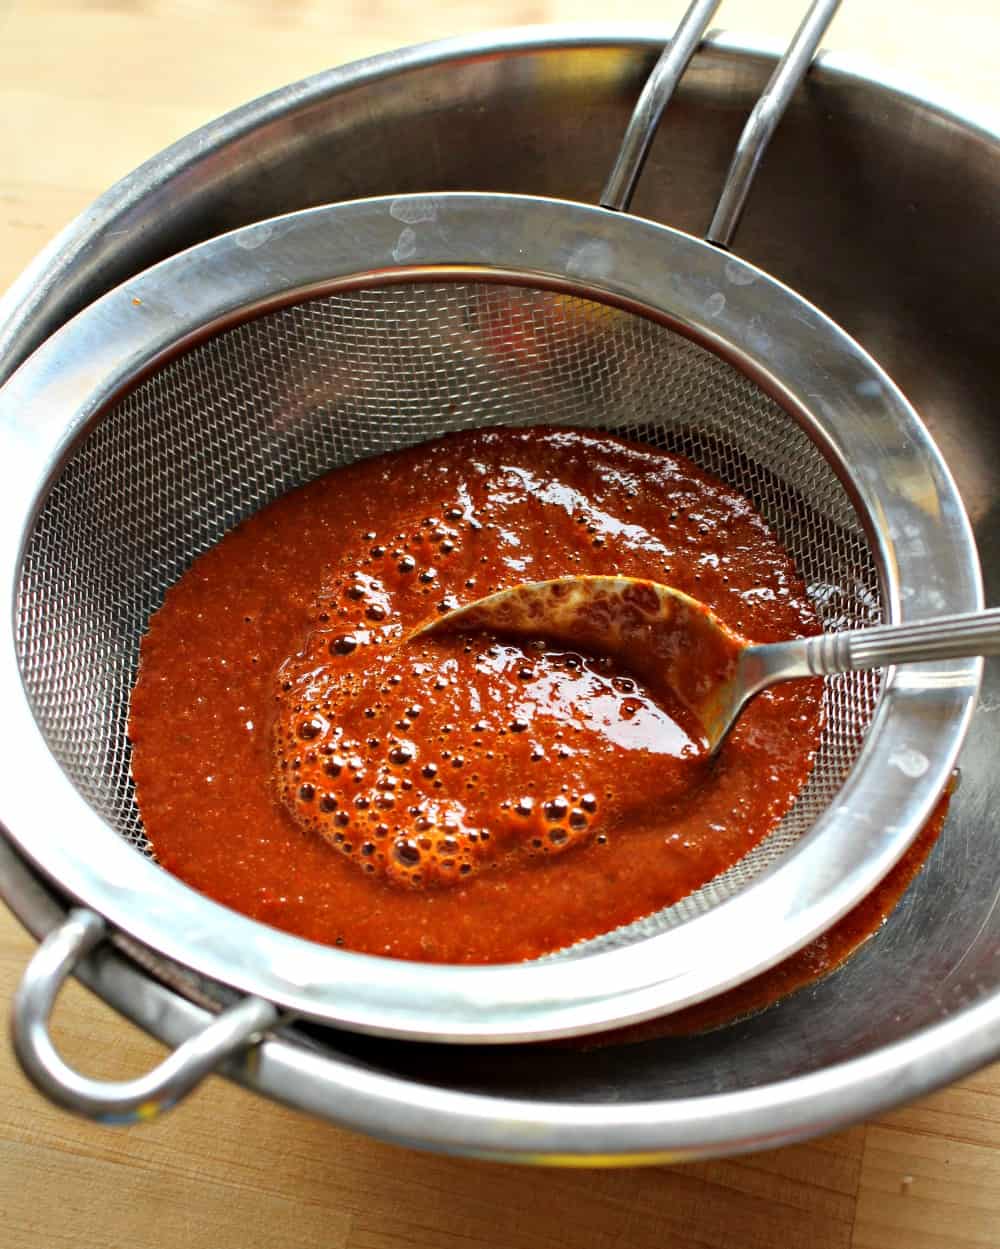 An image showing how to strain the diabla sauce.